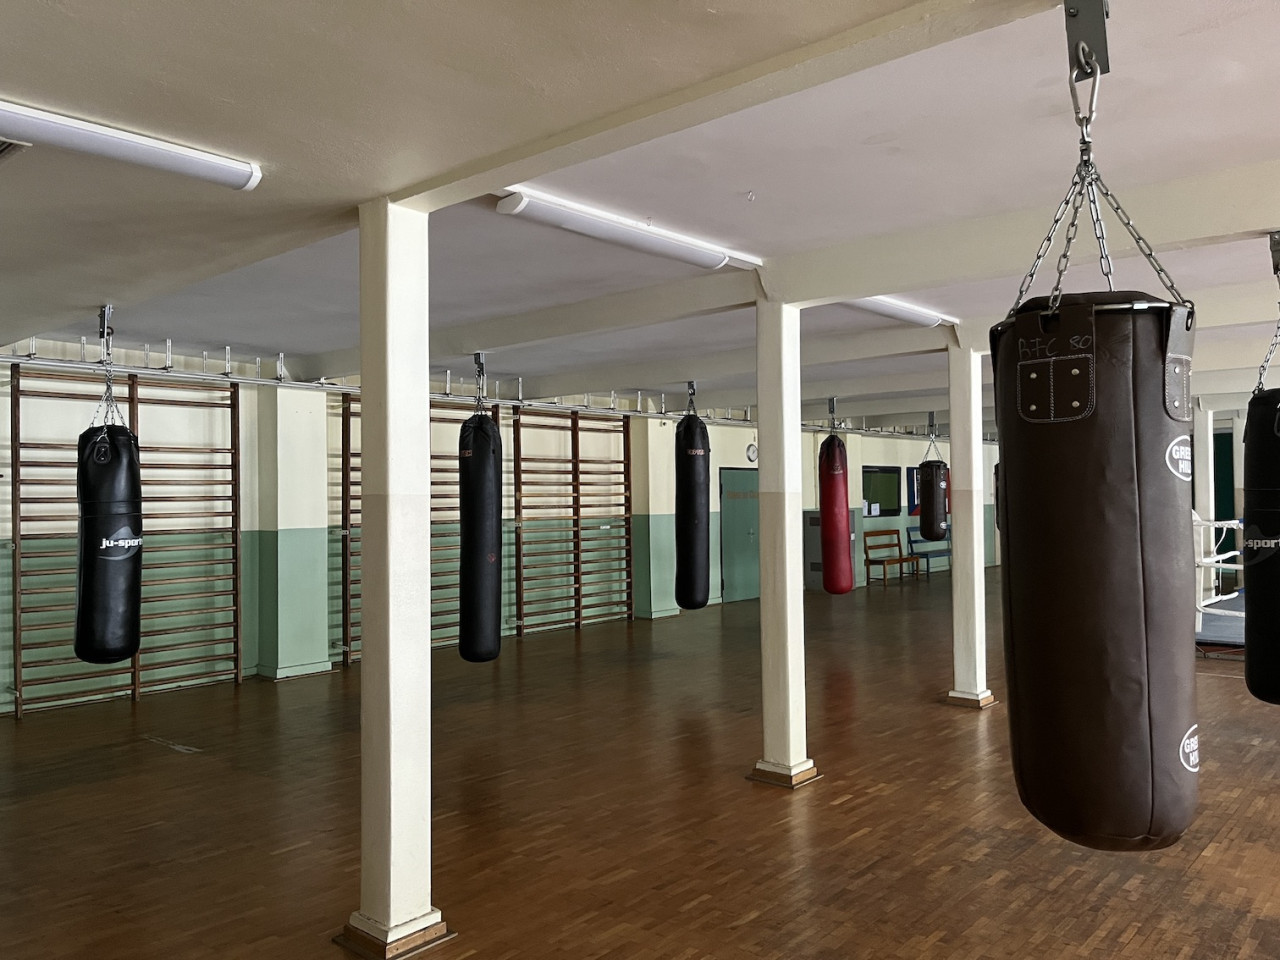 plush74 location film photo event germany berlin vintage gym fitness boxing 133